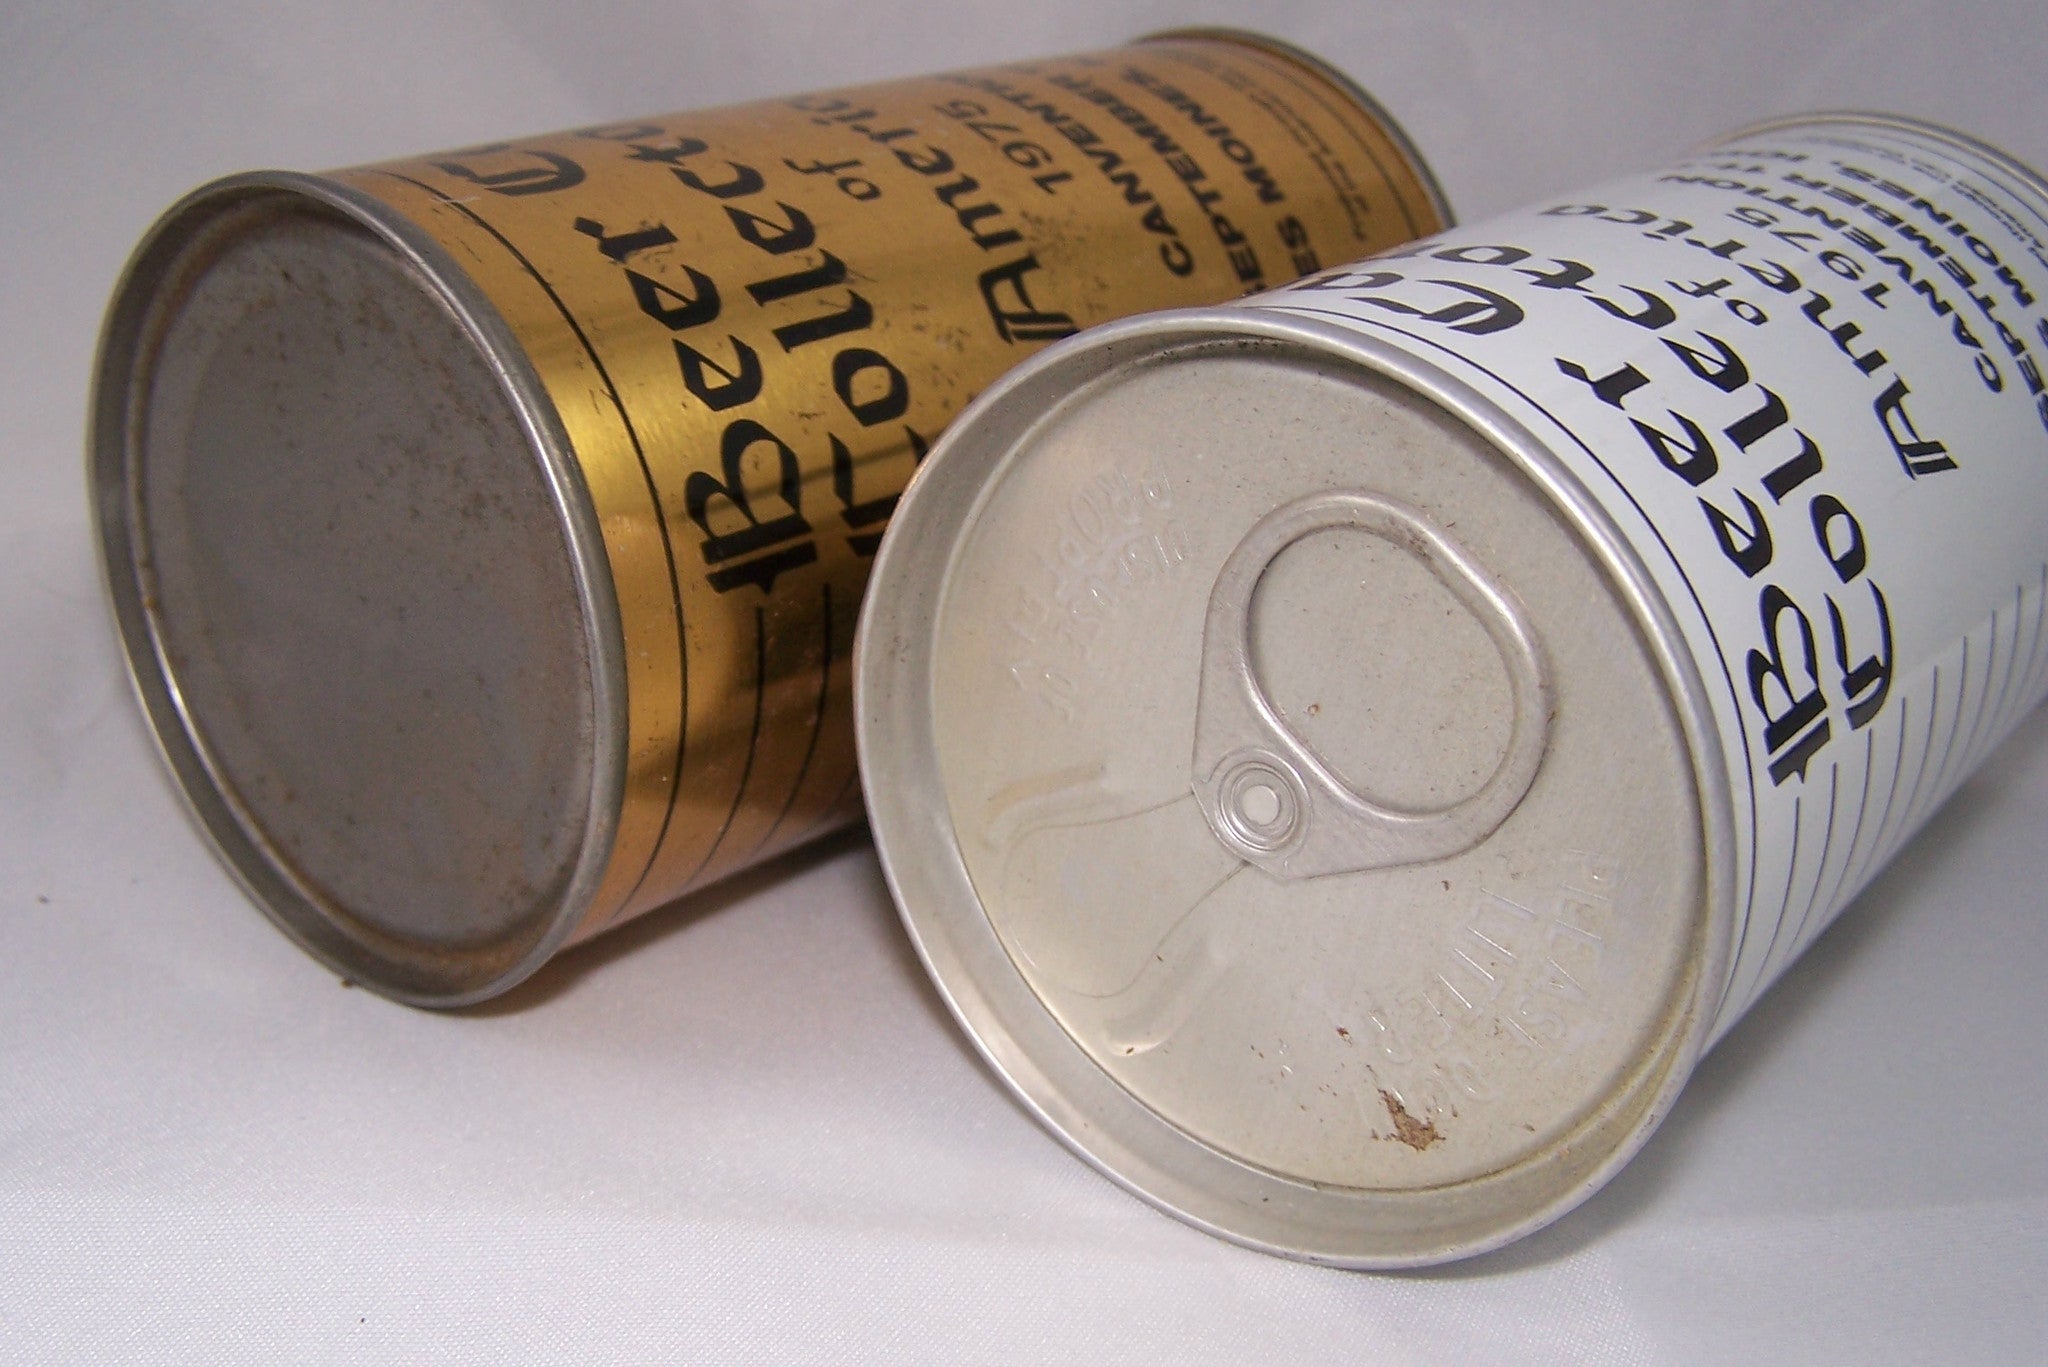 Pair of BCCA 1975 Canvention cans, USBC II 208-30, and Test can. Sold 6/25/15